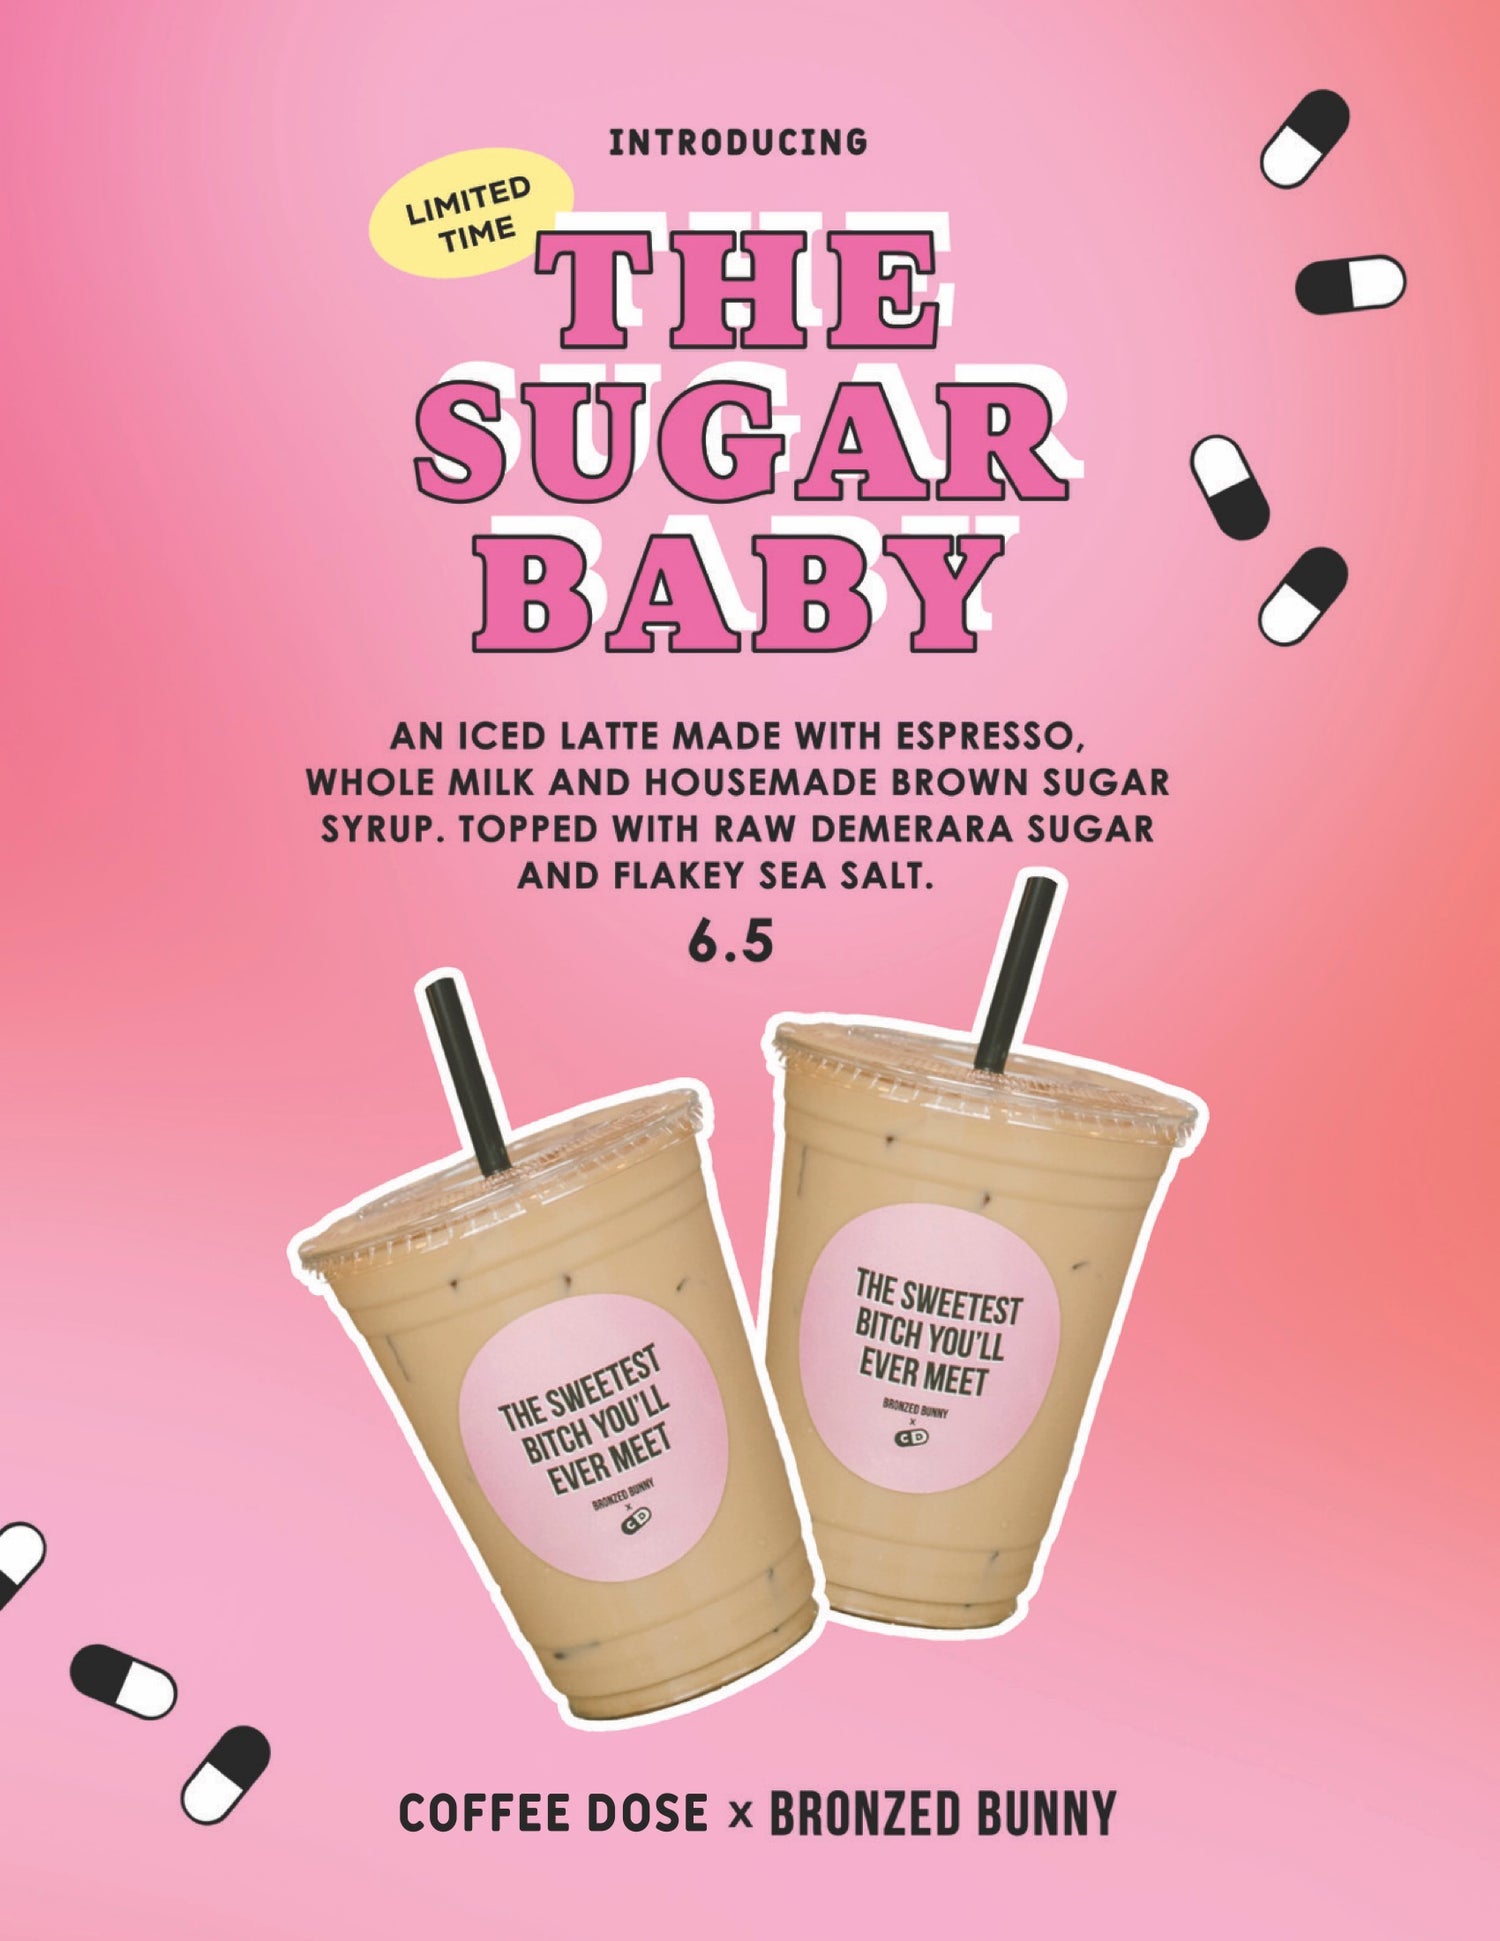 Introducing the Sugar Baby. AN ICED LATTE MADE WITH ESPRESSO, WHOLE MILK AND HOUSEMADE BROWN SUGAR SYRUP. TOPPED WITH RAW DEMERARA SUGAR AND FLAKEY SEA SALT. 6.5